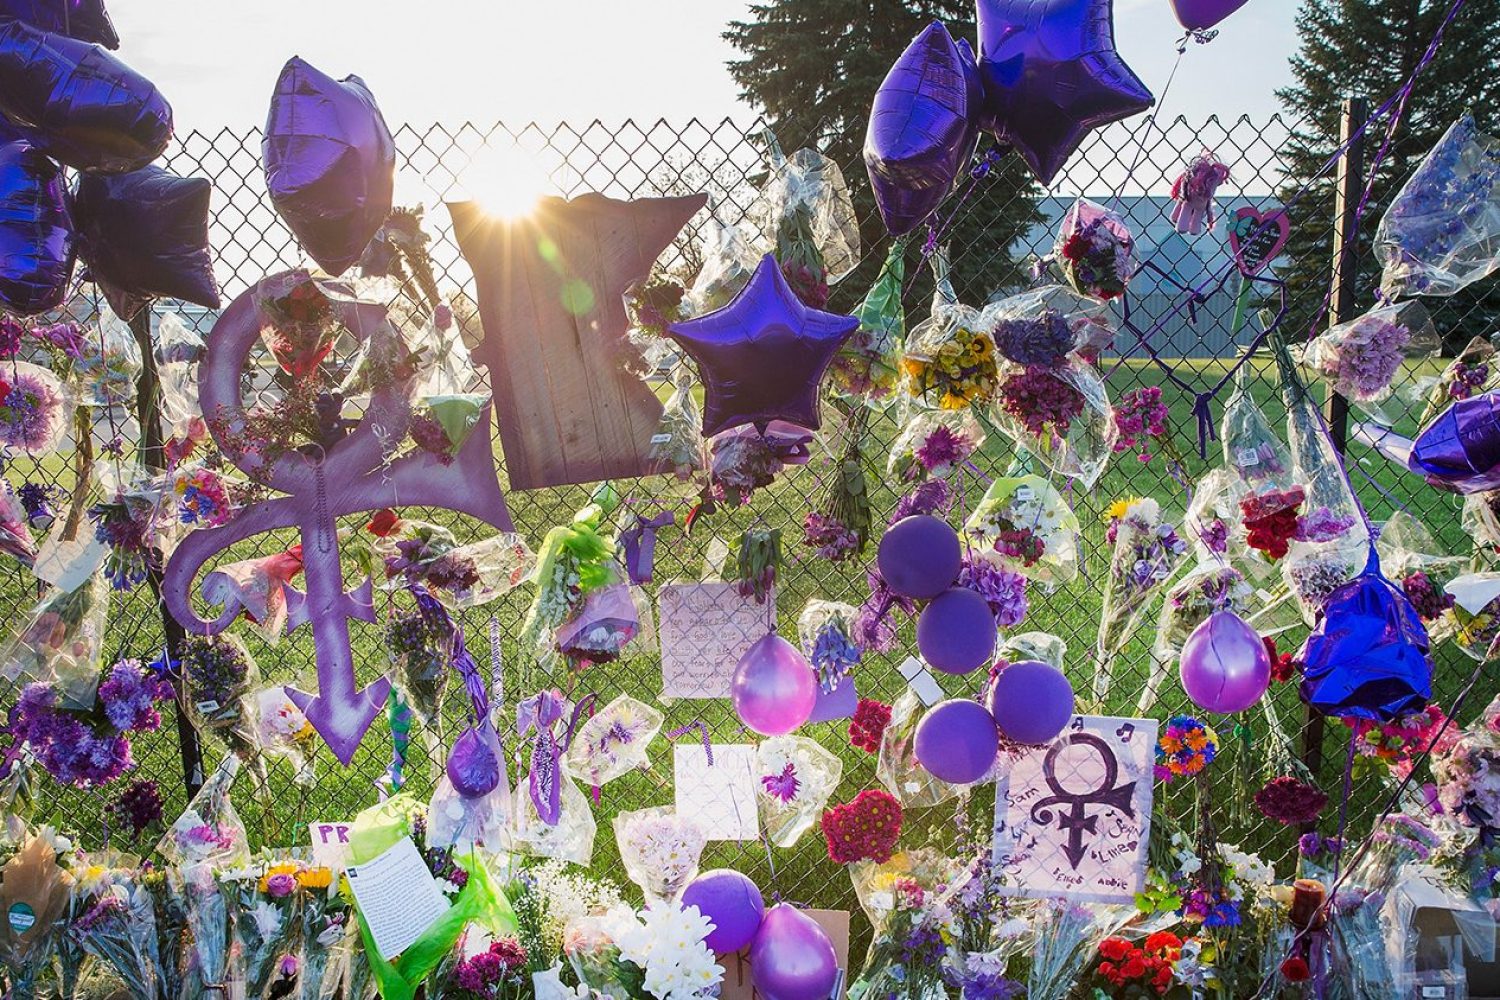 Mementos left by fans are attached to the fence which surrounds Paisley Park, the home and studio of Prince, on April 23, 2016 in Chanhassen, Minnesota. Prince, 57, was pronounced dead shortly after being found unresponsive April 21 in an elevator at Paisley Park. (Scott Olson/Getty Images)